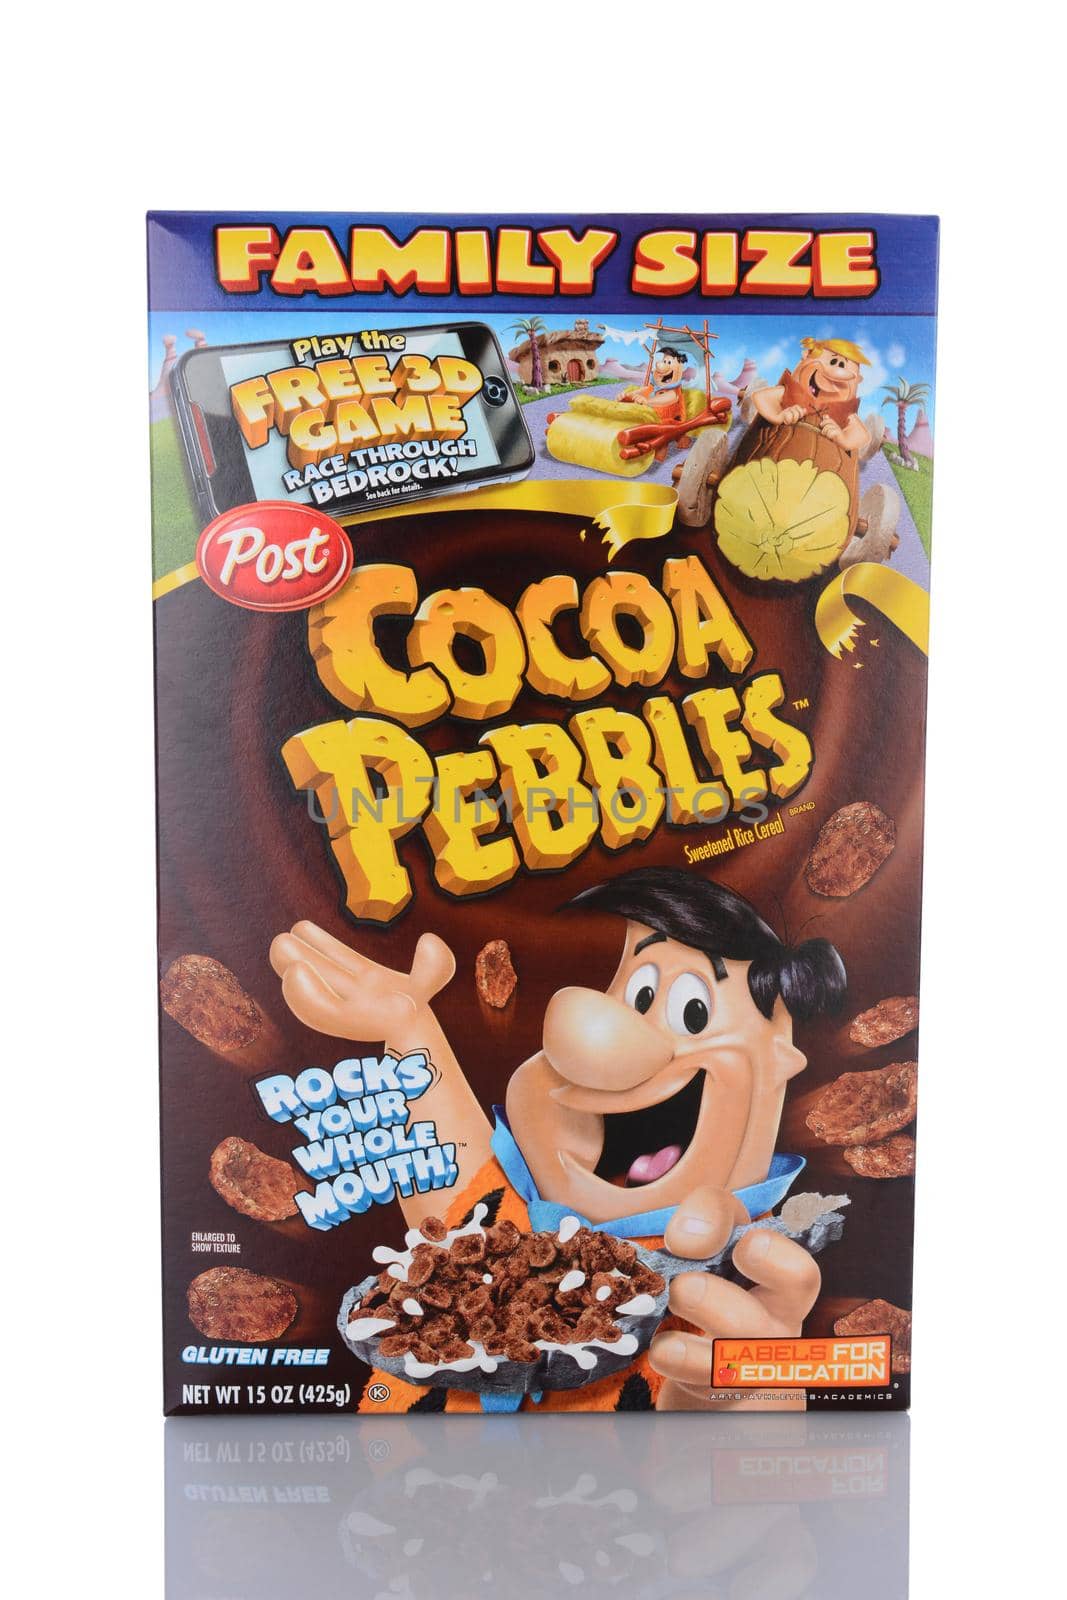 IRVINE, CA - January 29, 2014: A 15 oz box of Cocoa Pebbles breakfast cereal. The chocolate flavored crisp rice cereal bits is the oldest cereal brand based on characters from a TV series.